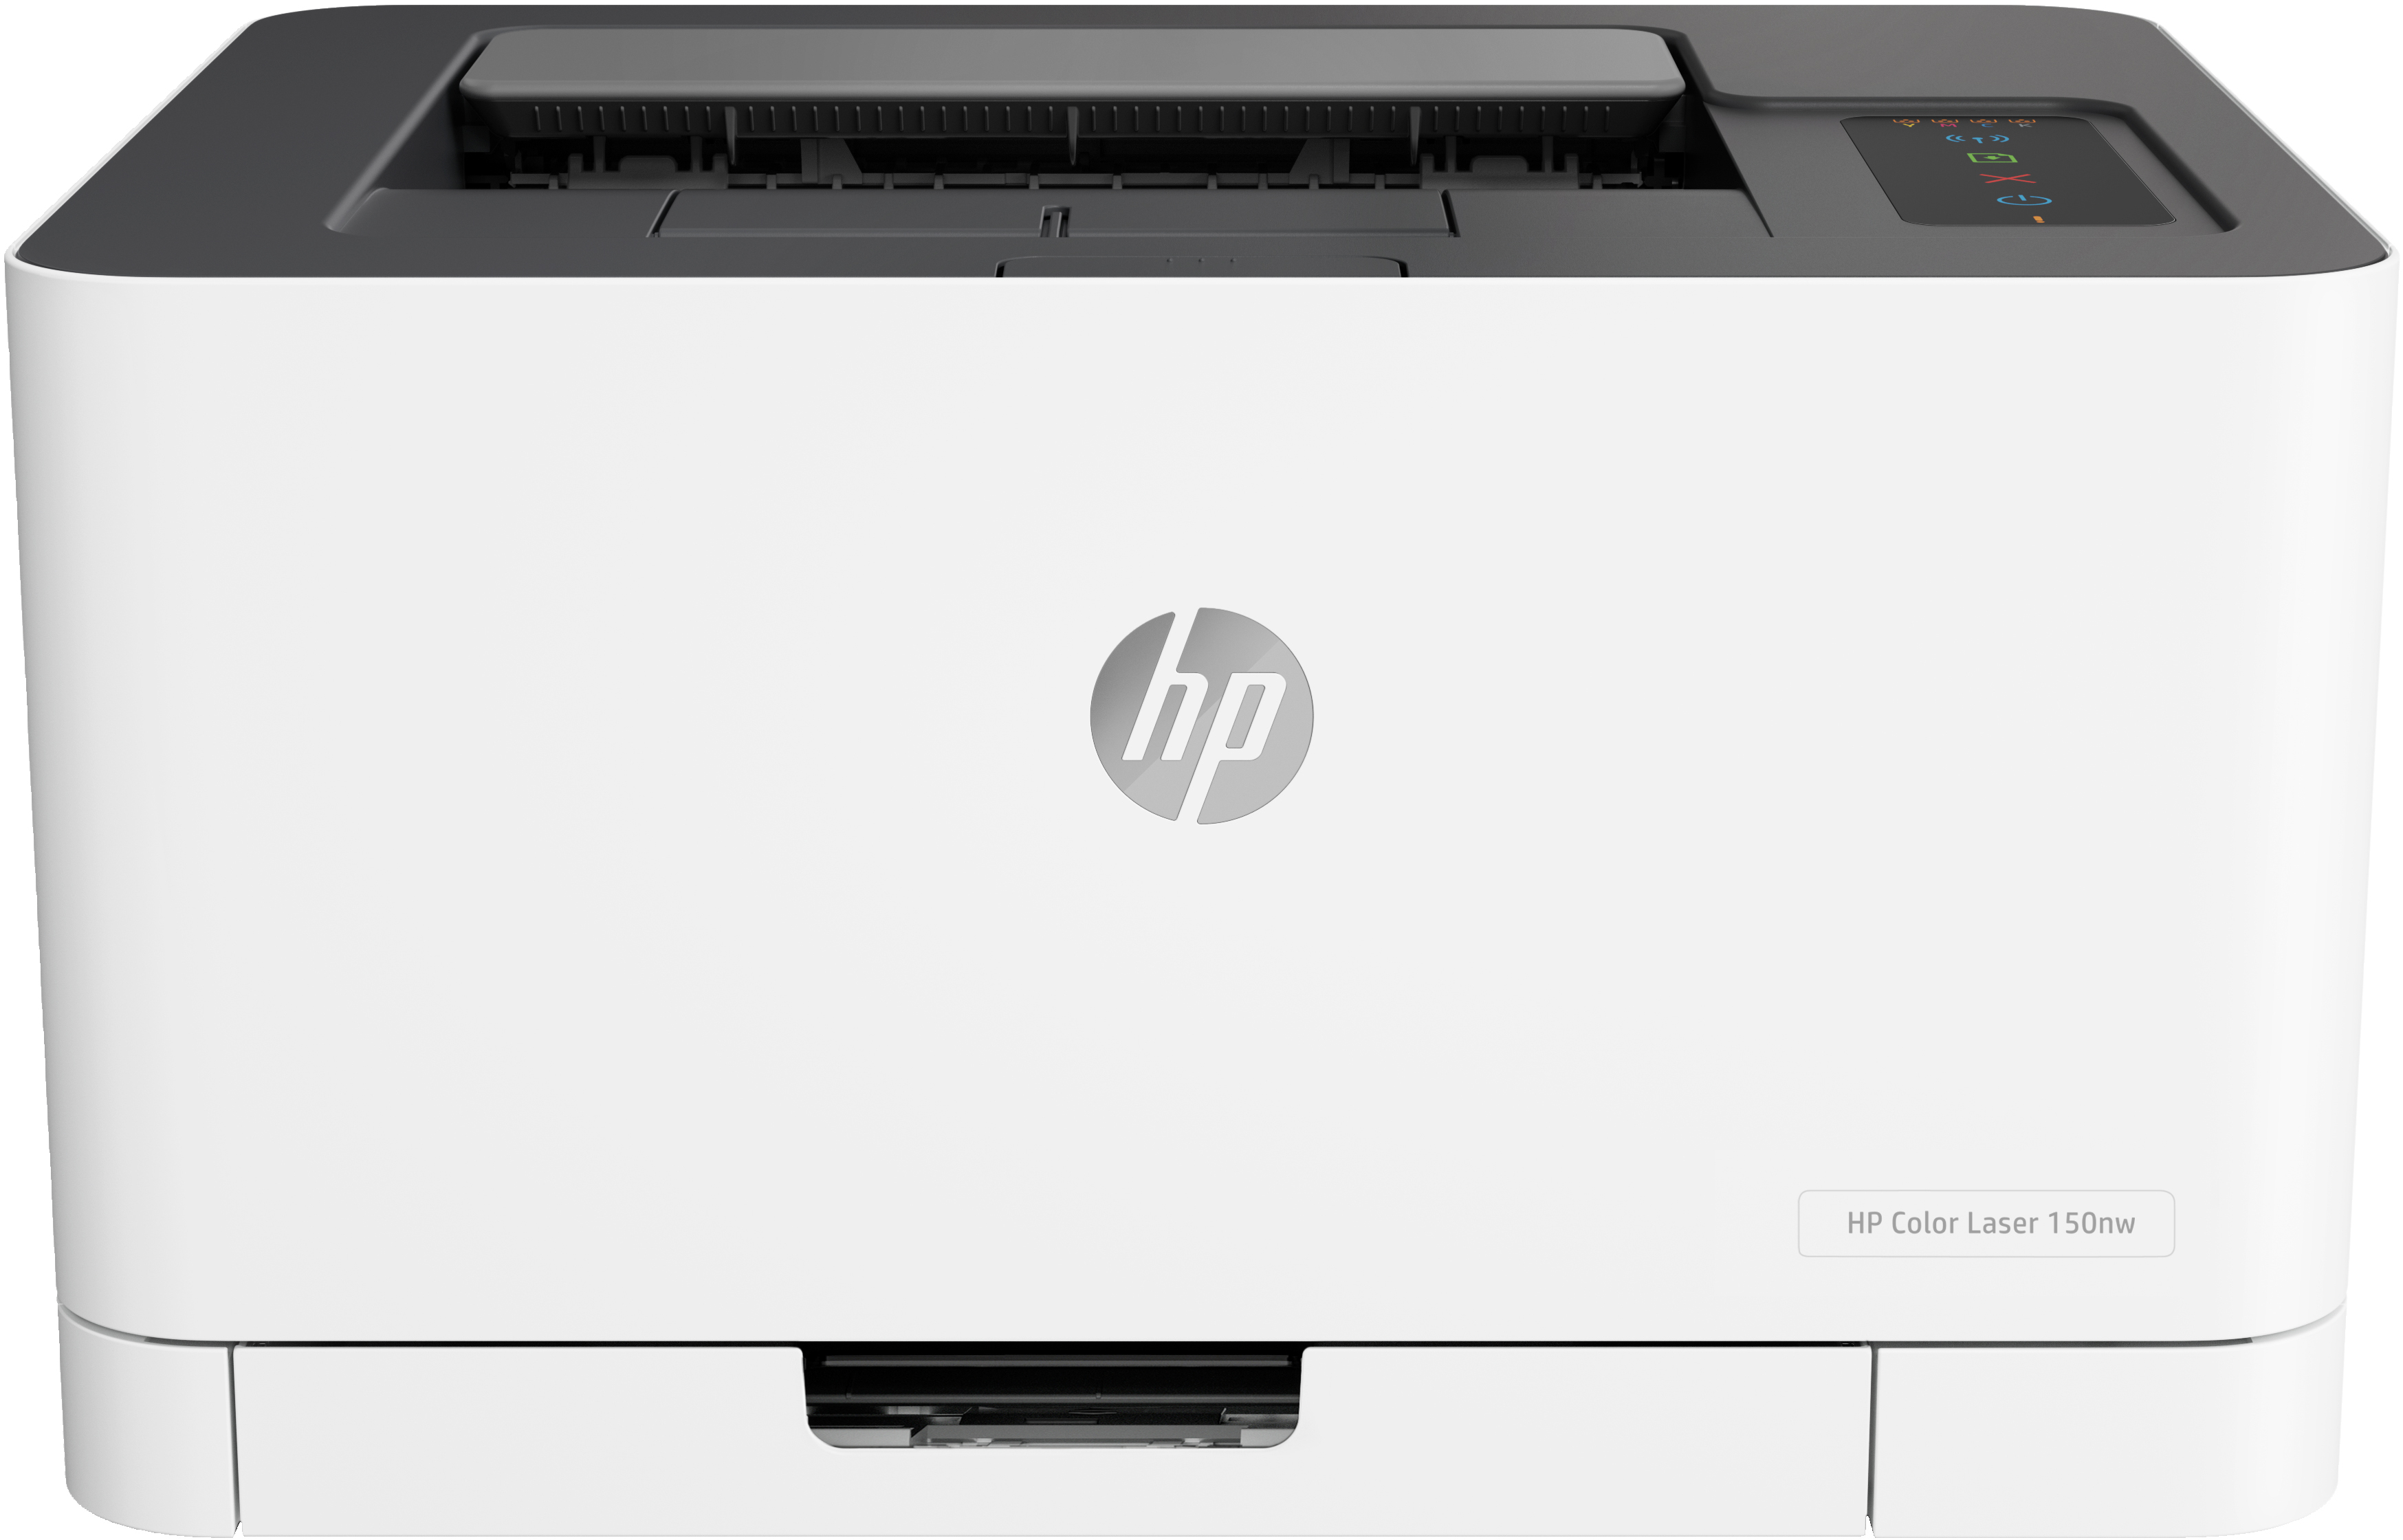 HP Color HP Color Laser 150nw, Print (4ZB95A#B19) kopen » Centralpoint